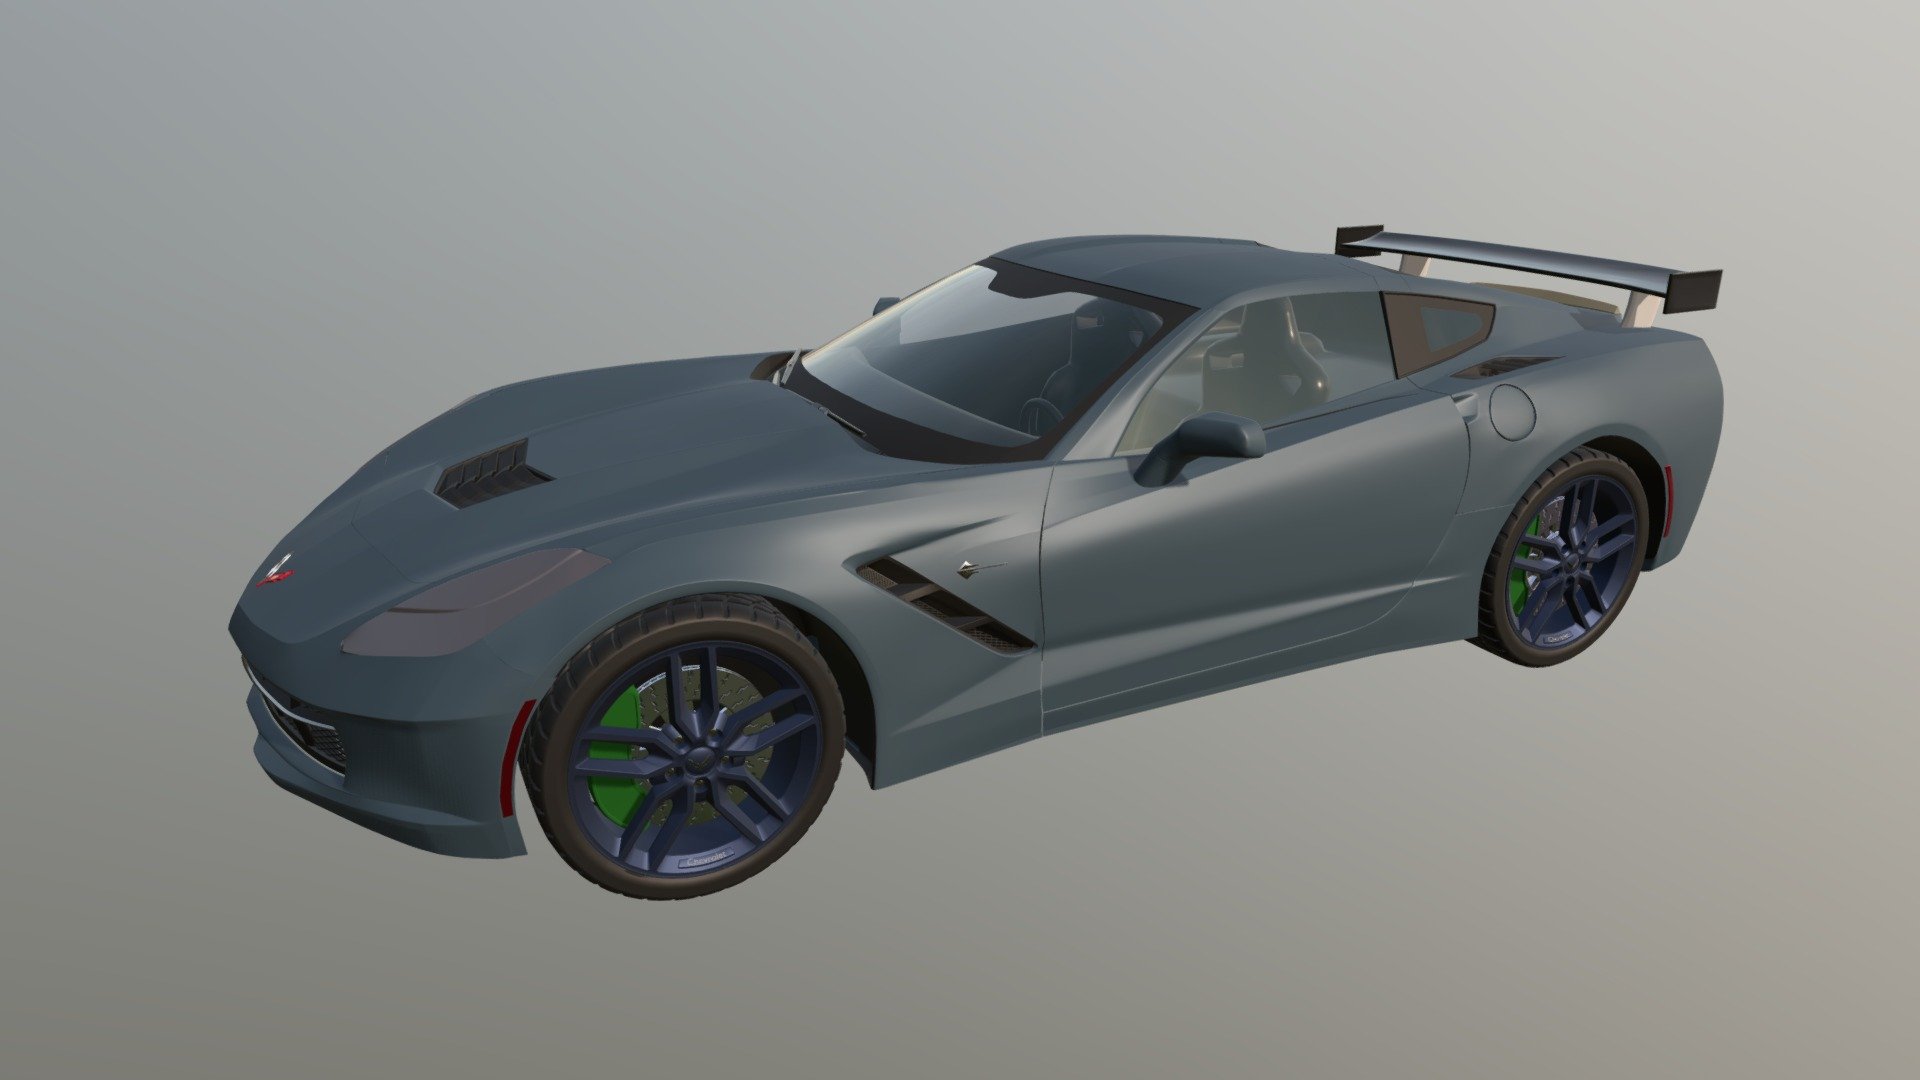 Chevrolet Corvette - basic color 
Modeled in Blender 2.9
Textures and materials in Blender 2.9
Wheels with origins. Ready for animation, game, render.
Tuning design racing car. 
with basic interiors 3d model